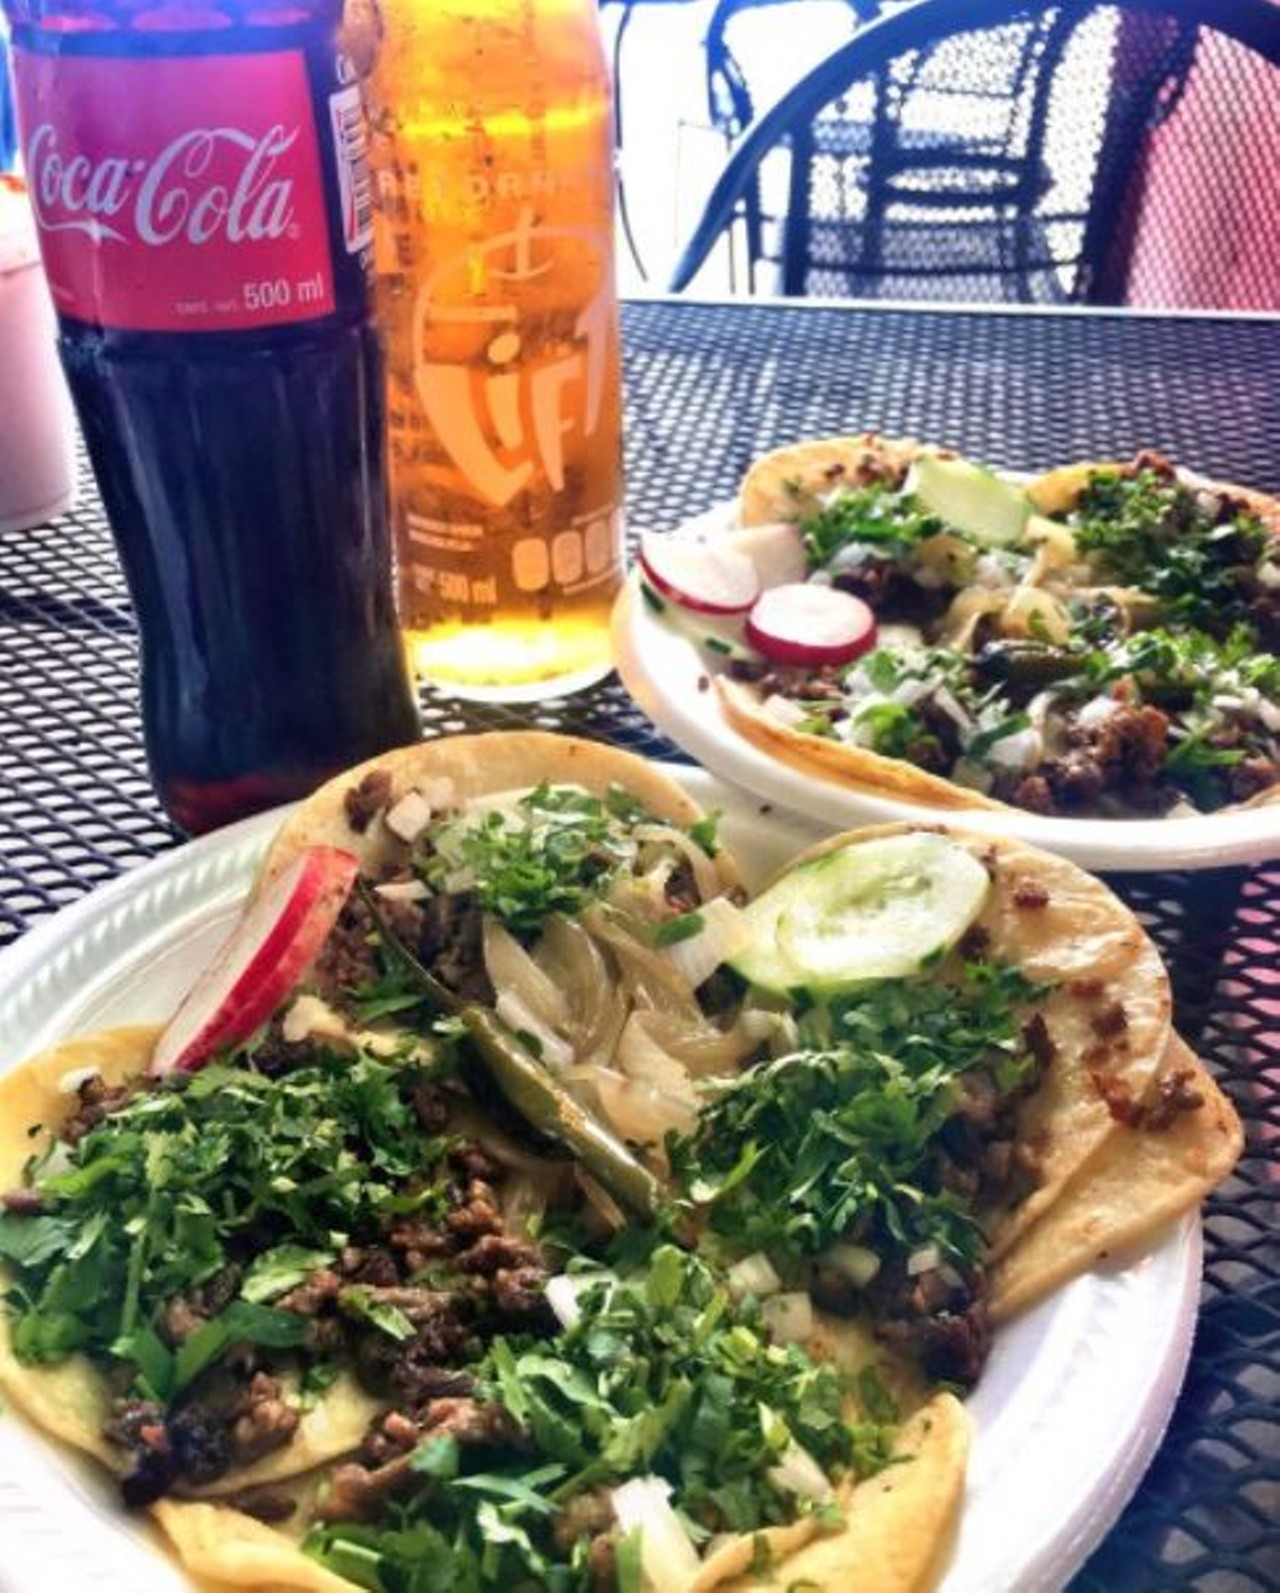 Erick&#146;s Tacos
12715 Nacogdoches Rd., (210) 590-0994
This gem is open 11 a.m. to 4 a.m. AND has a fruteria next door. What are you waiting for?
Photo via Yelp, Michelle H.